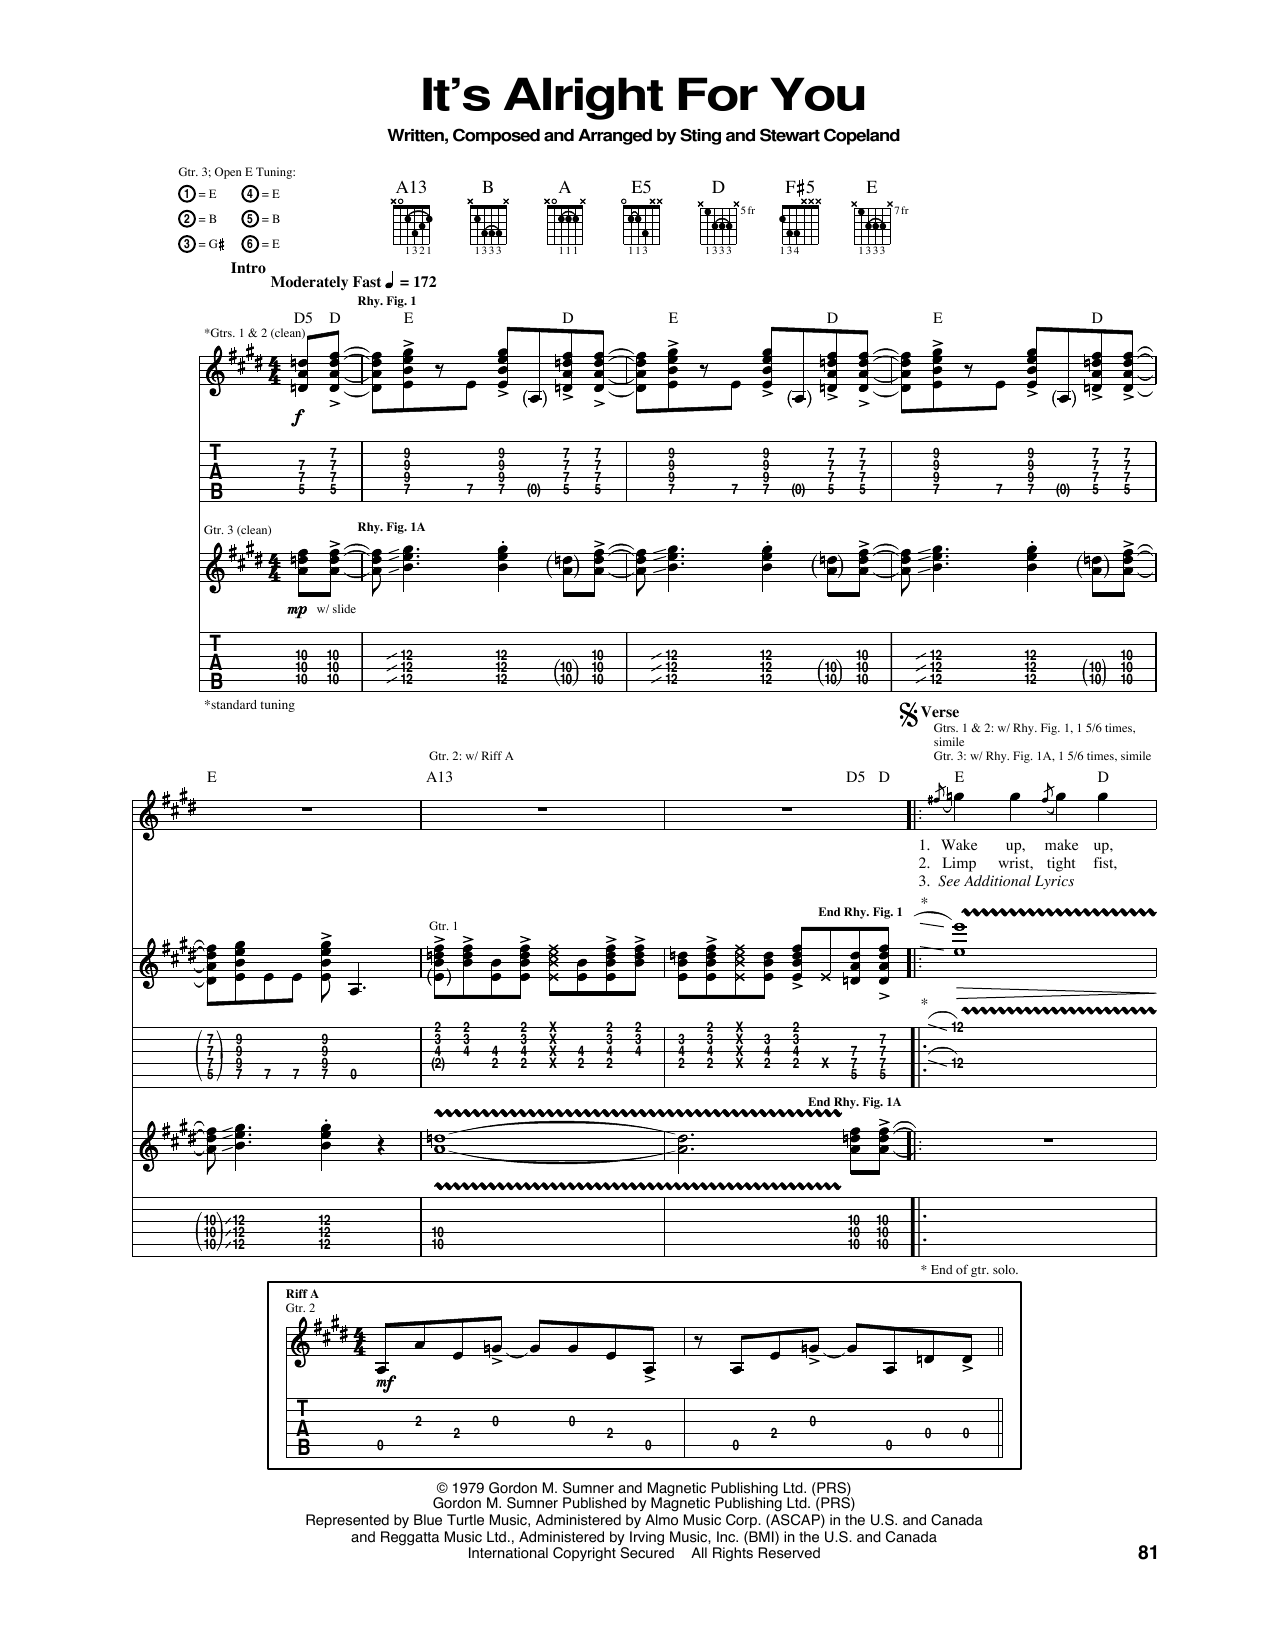 Download The Police It's Alright For You Sheet Music